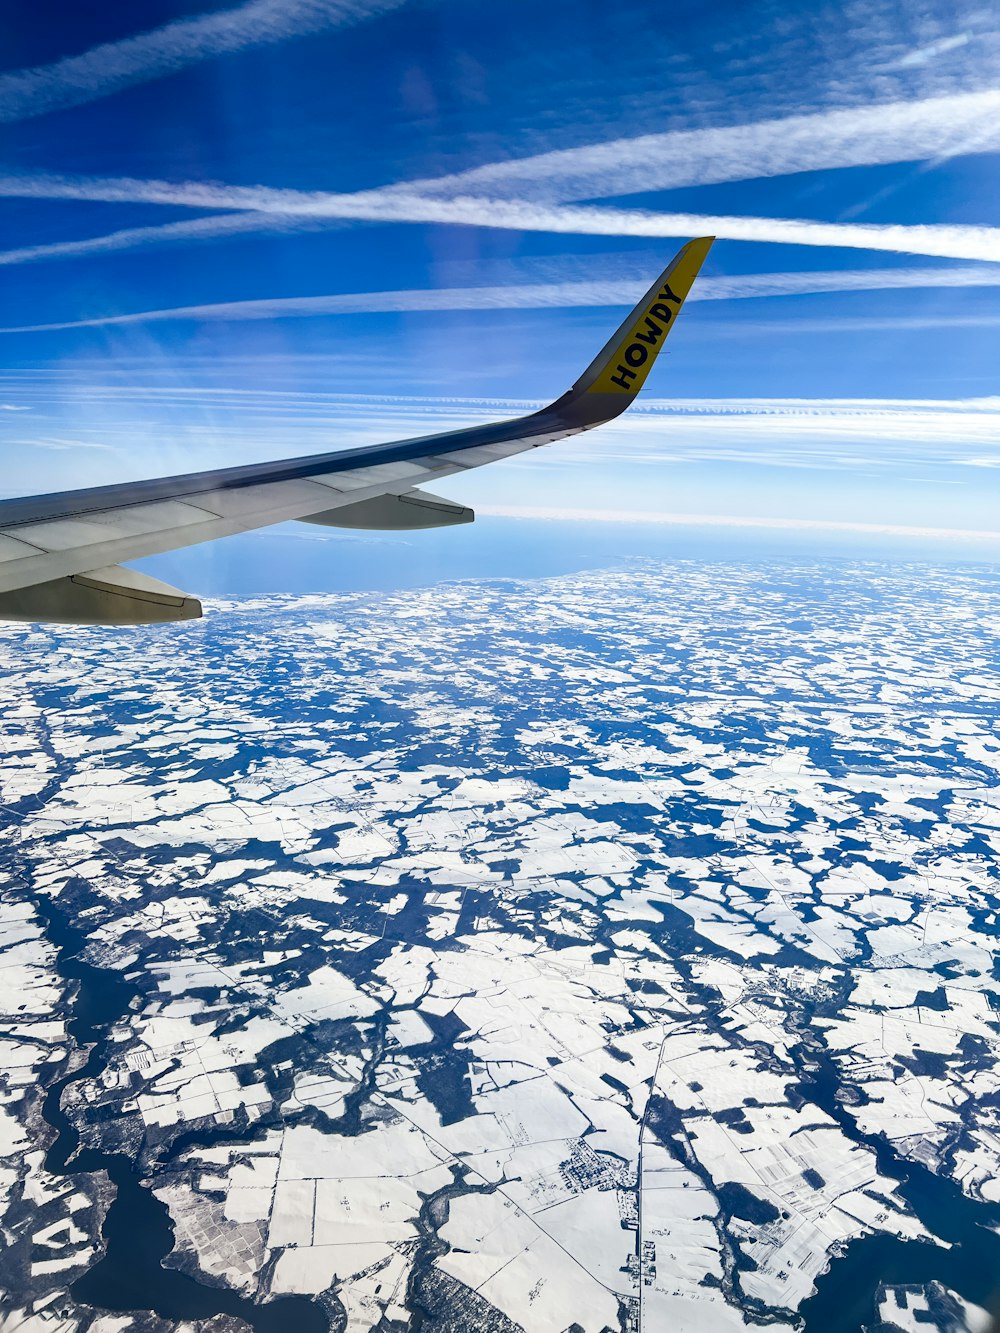 a view of the wing of an airplane flying over ice floes